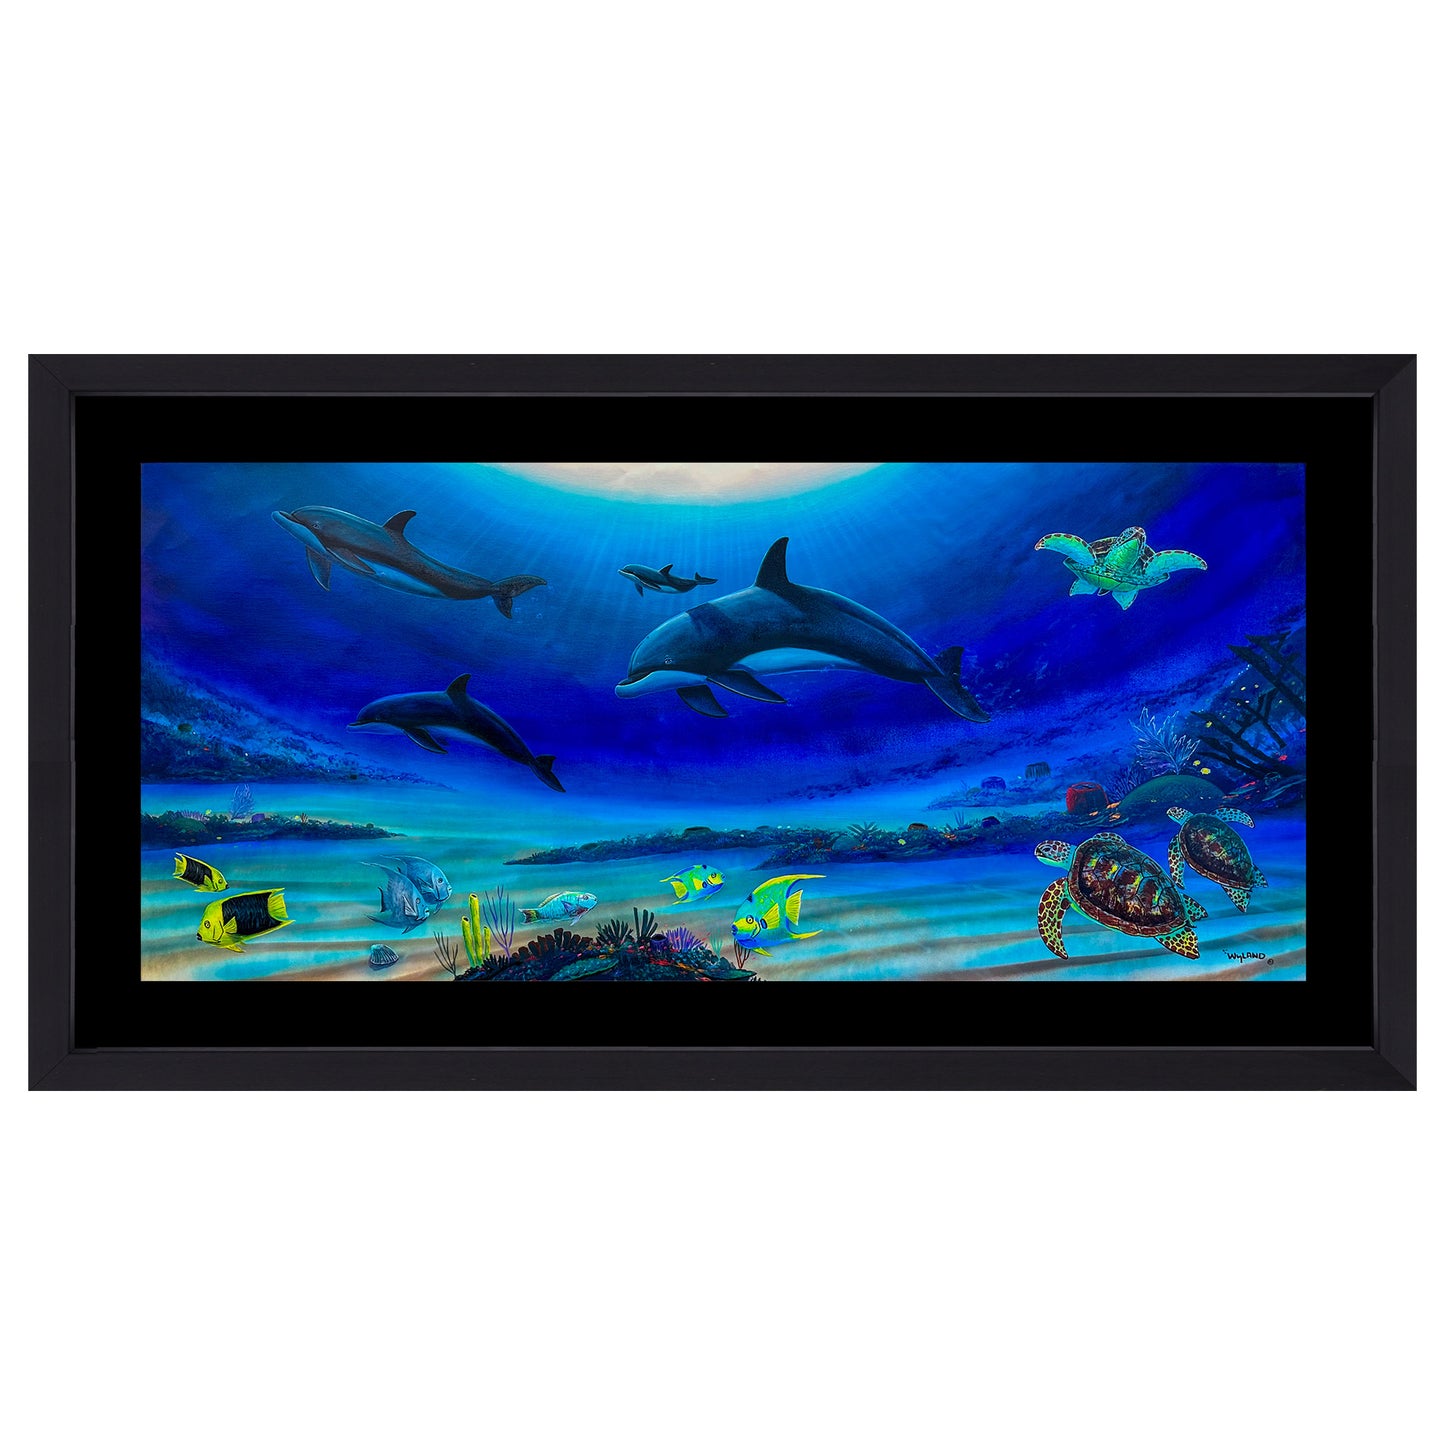 The Art of Wyland-Exclusive Collection "Caribbean Paradise"